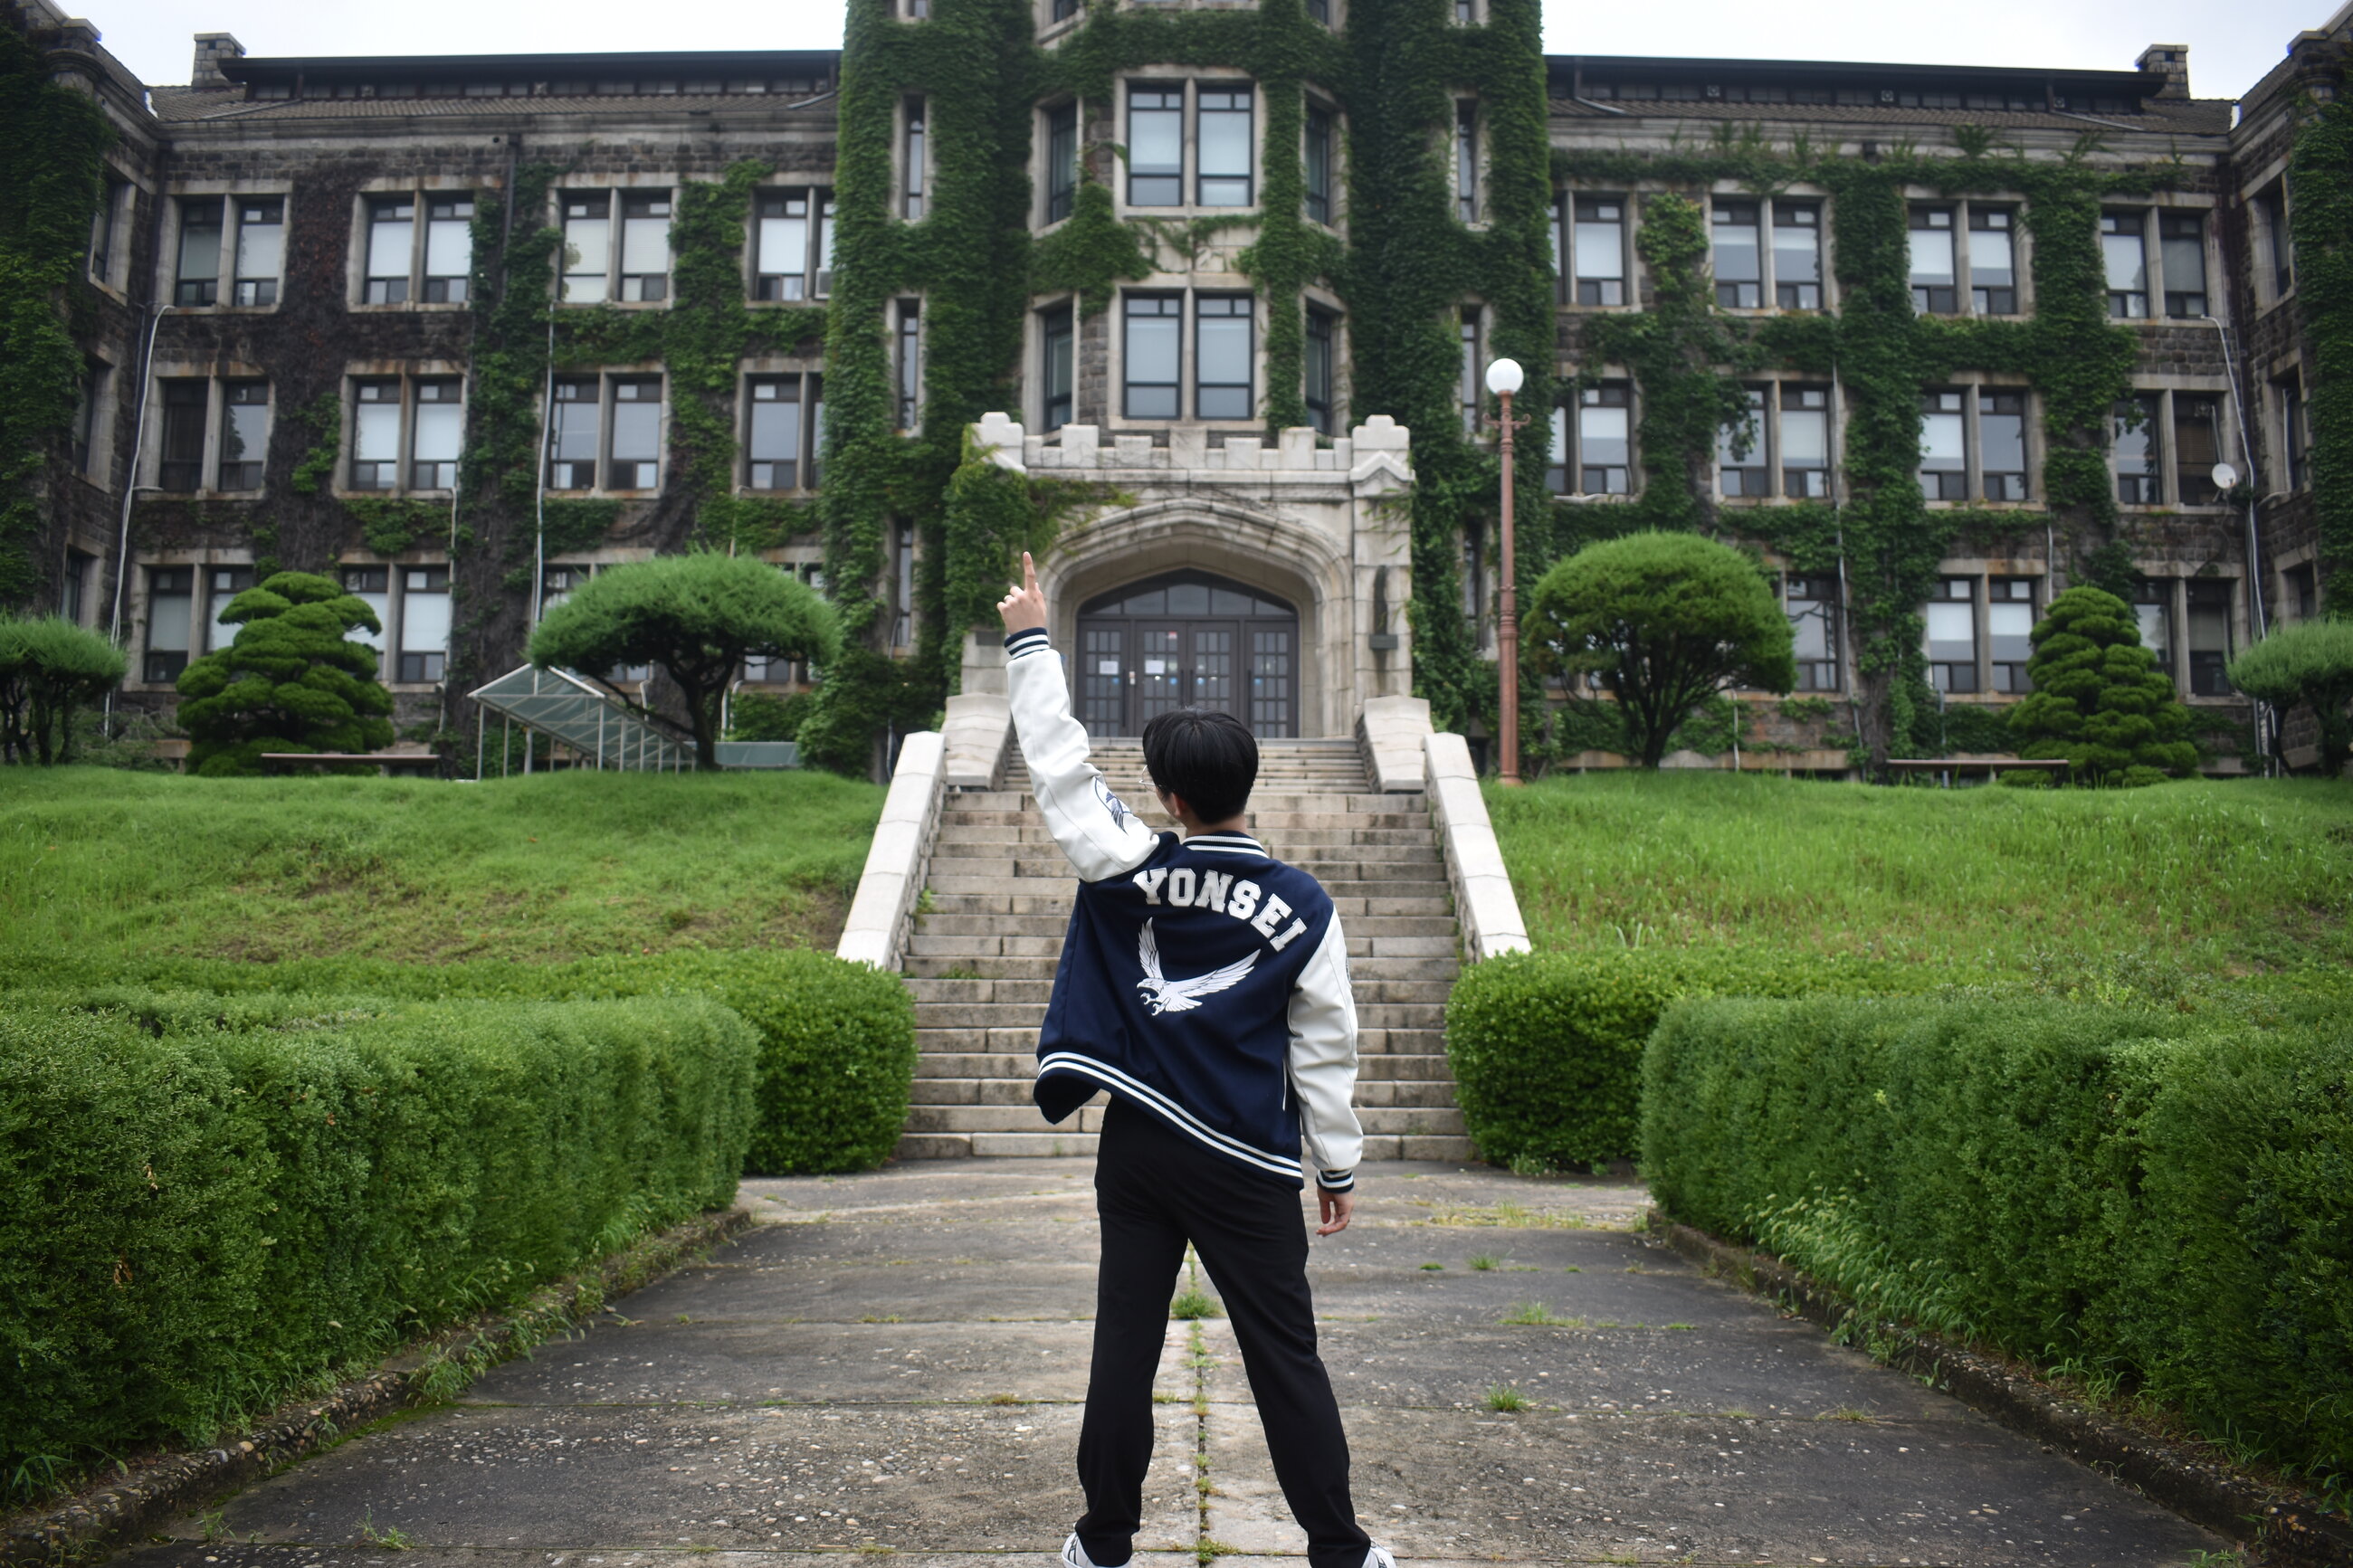 Representing Yonsei Univeristy in front of one of its ivy-covered buildings. 